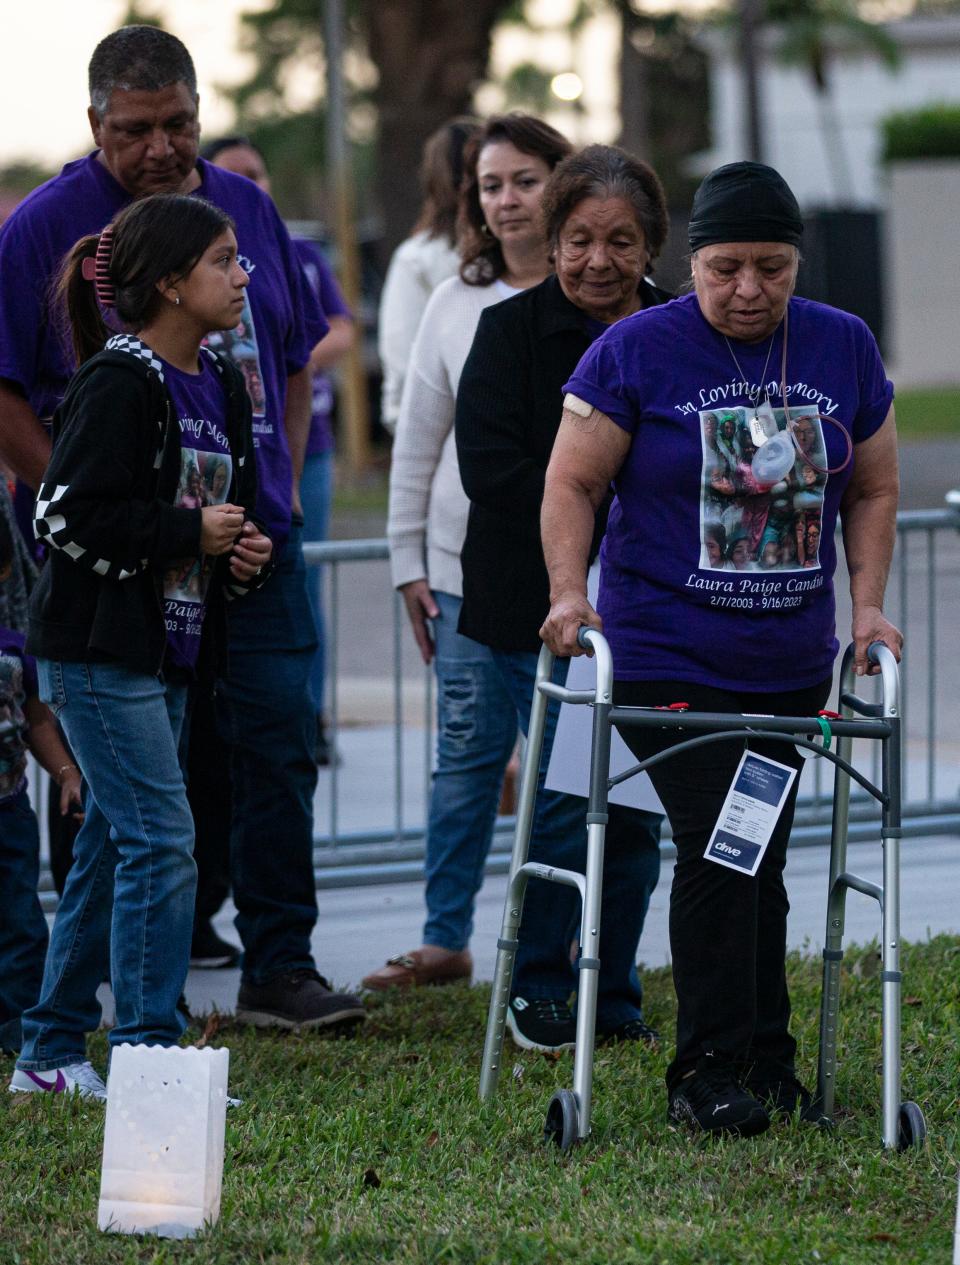 The family of Laura Candia, 20, of Immokalee, attends a candlelight vigil held by The Shelter for Abused Women & Children at the Immokalee Library in Immokalee on Thursday, Oct. 26, 2023. Candia was shot and killed on Sept. 16, 2023 in what authorities say was a domestic violence incident. Candia's grandmother, Olga Welch, front right, was shot multiple times in the incident that killed her granddaughter.